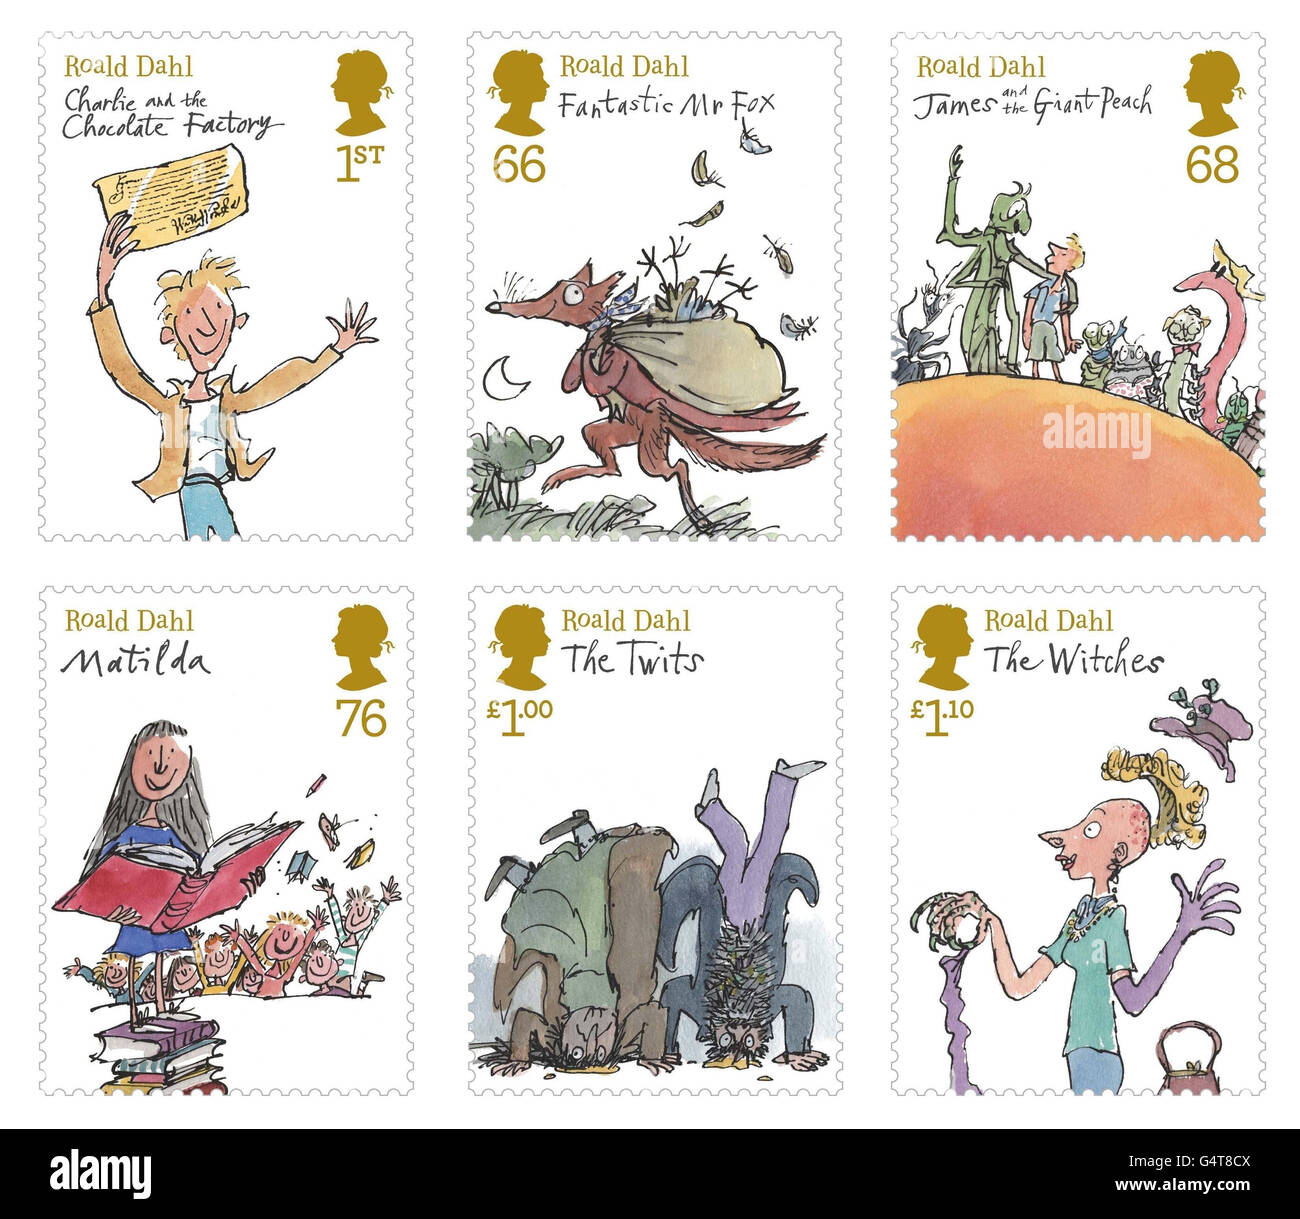 Royal Mail's new set of stamps celebrating the work of the iconic children's author, Roald Dahl, which are available from Post Offices from Tuesday 10th January. Stock Photo